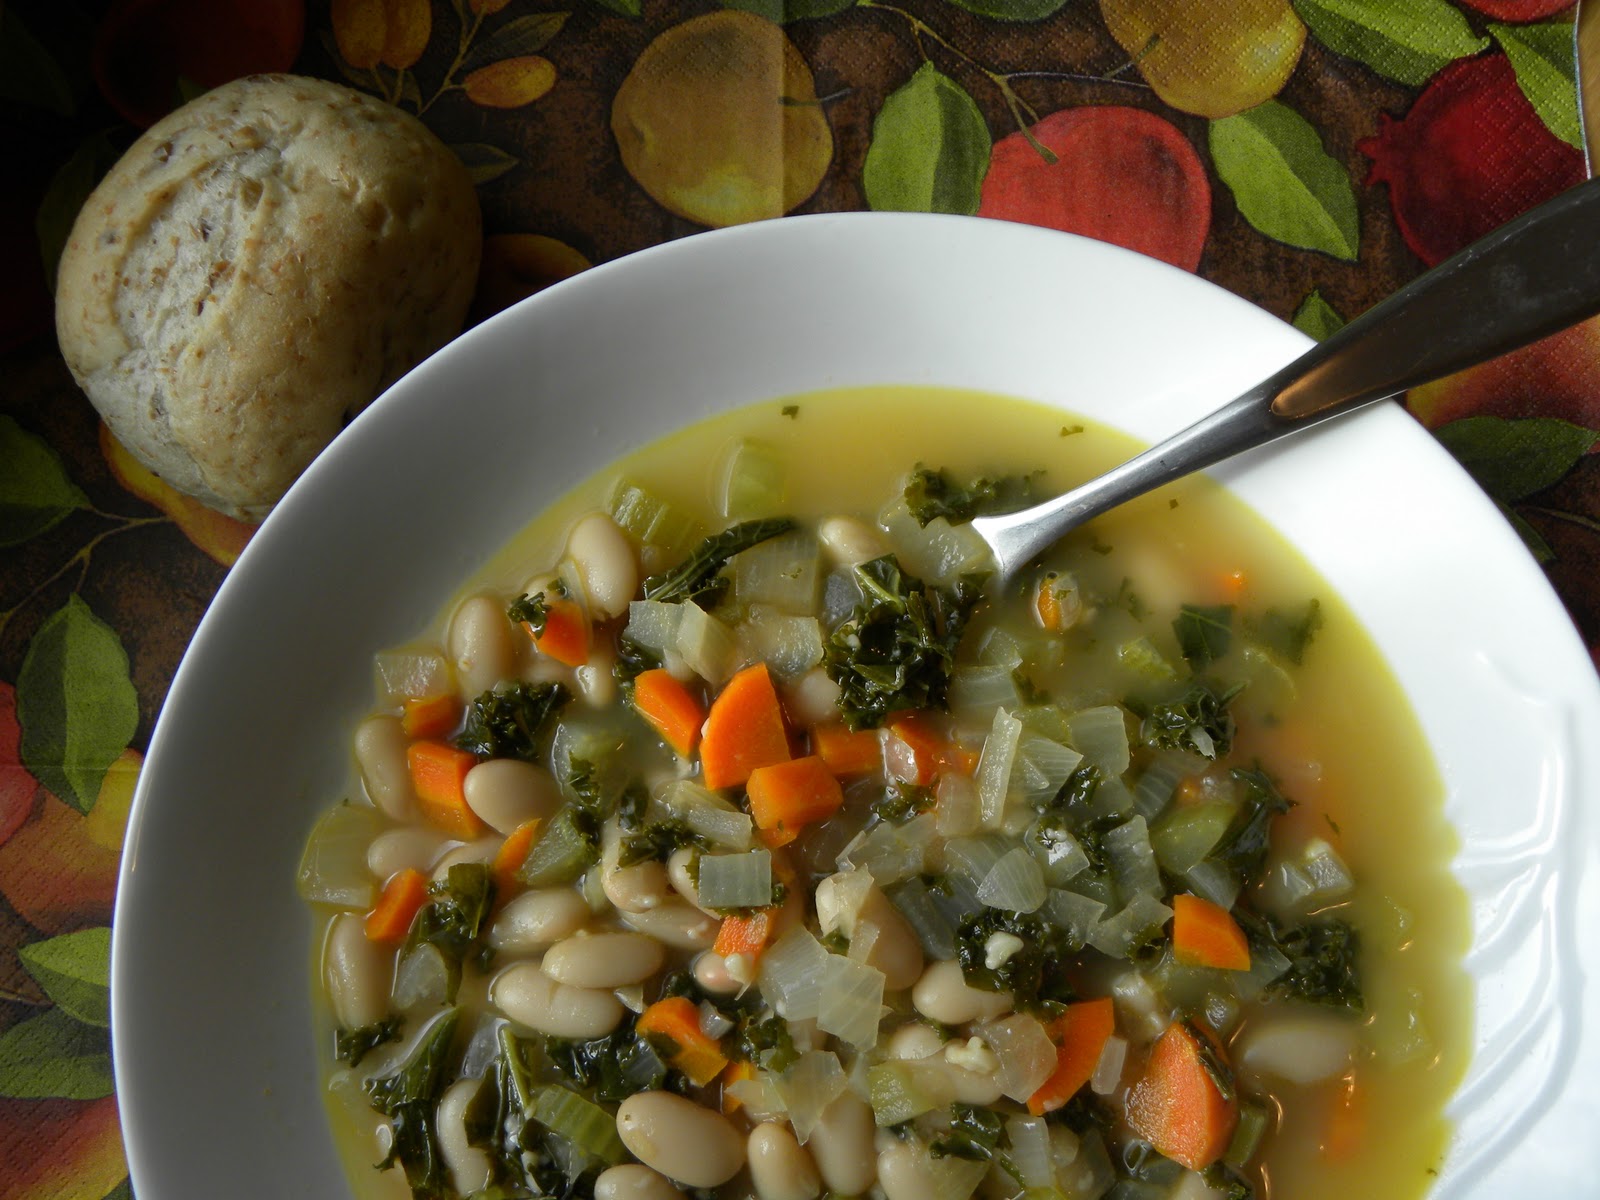 Cookbook Cooking: Peasant Soup